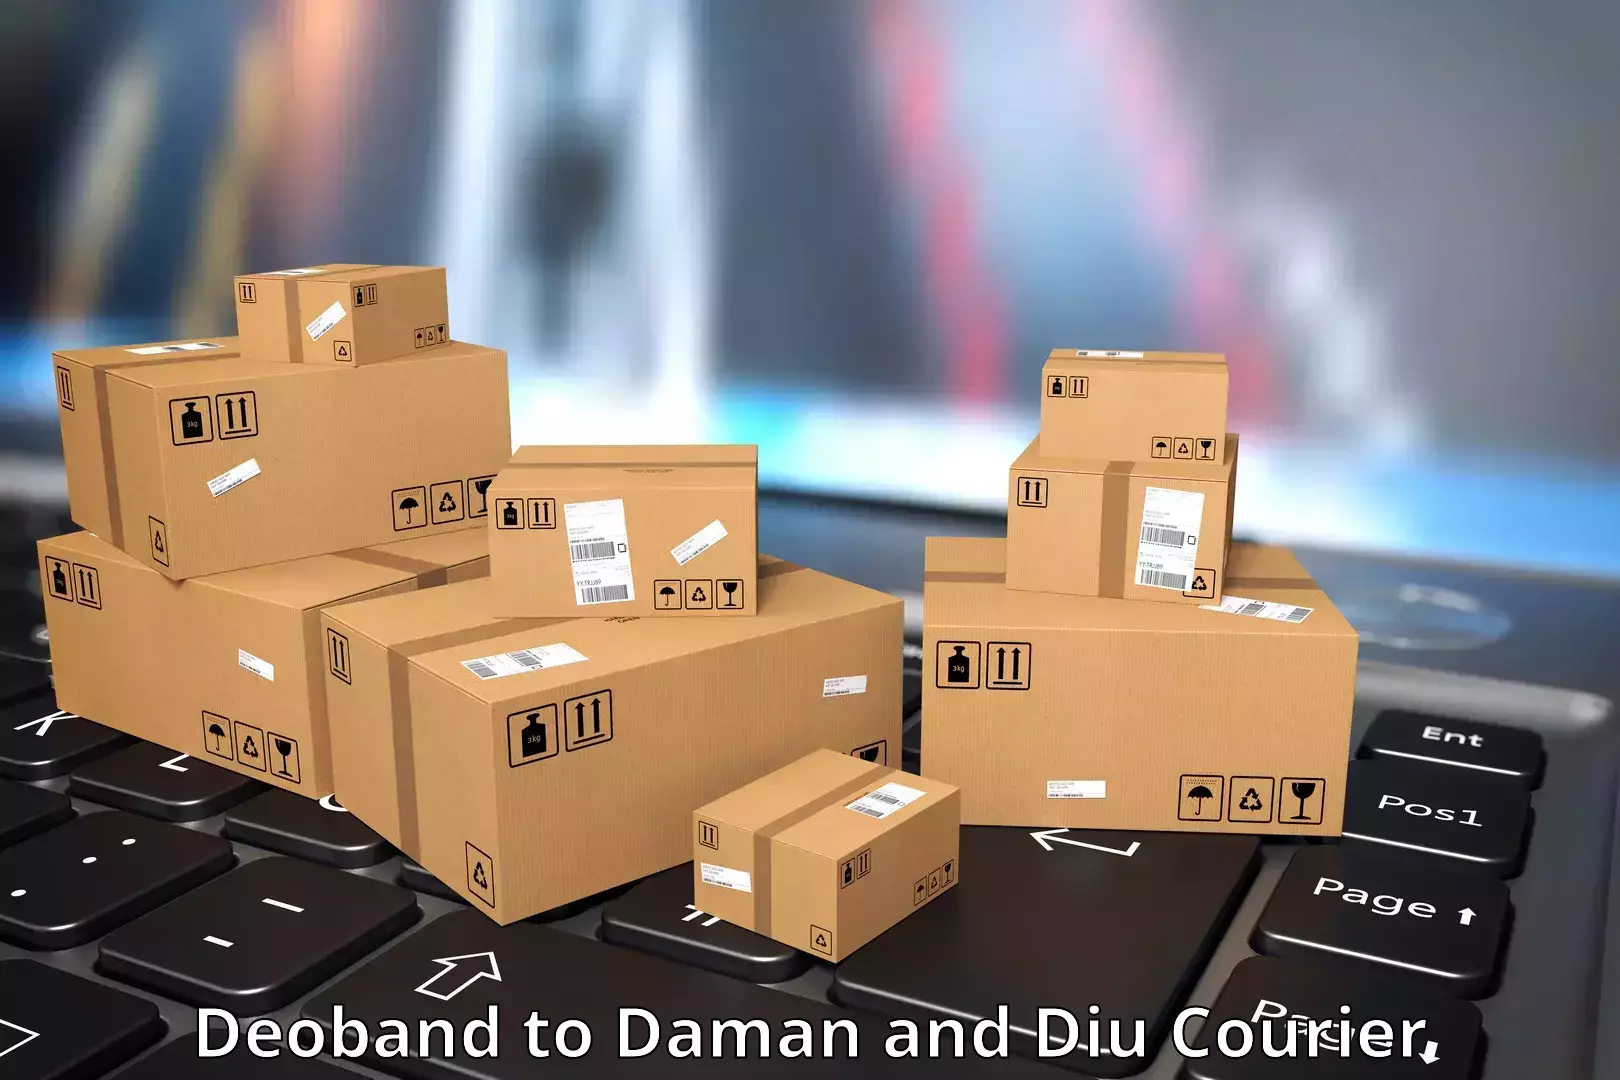 Nationwide courier service Deoband to Diu